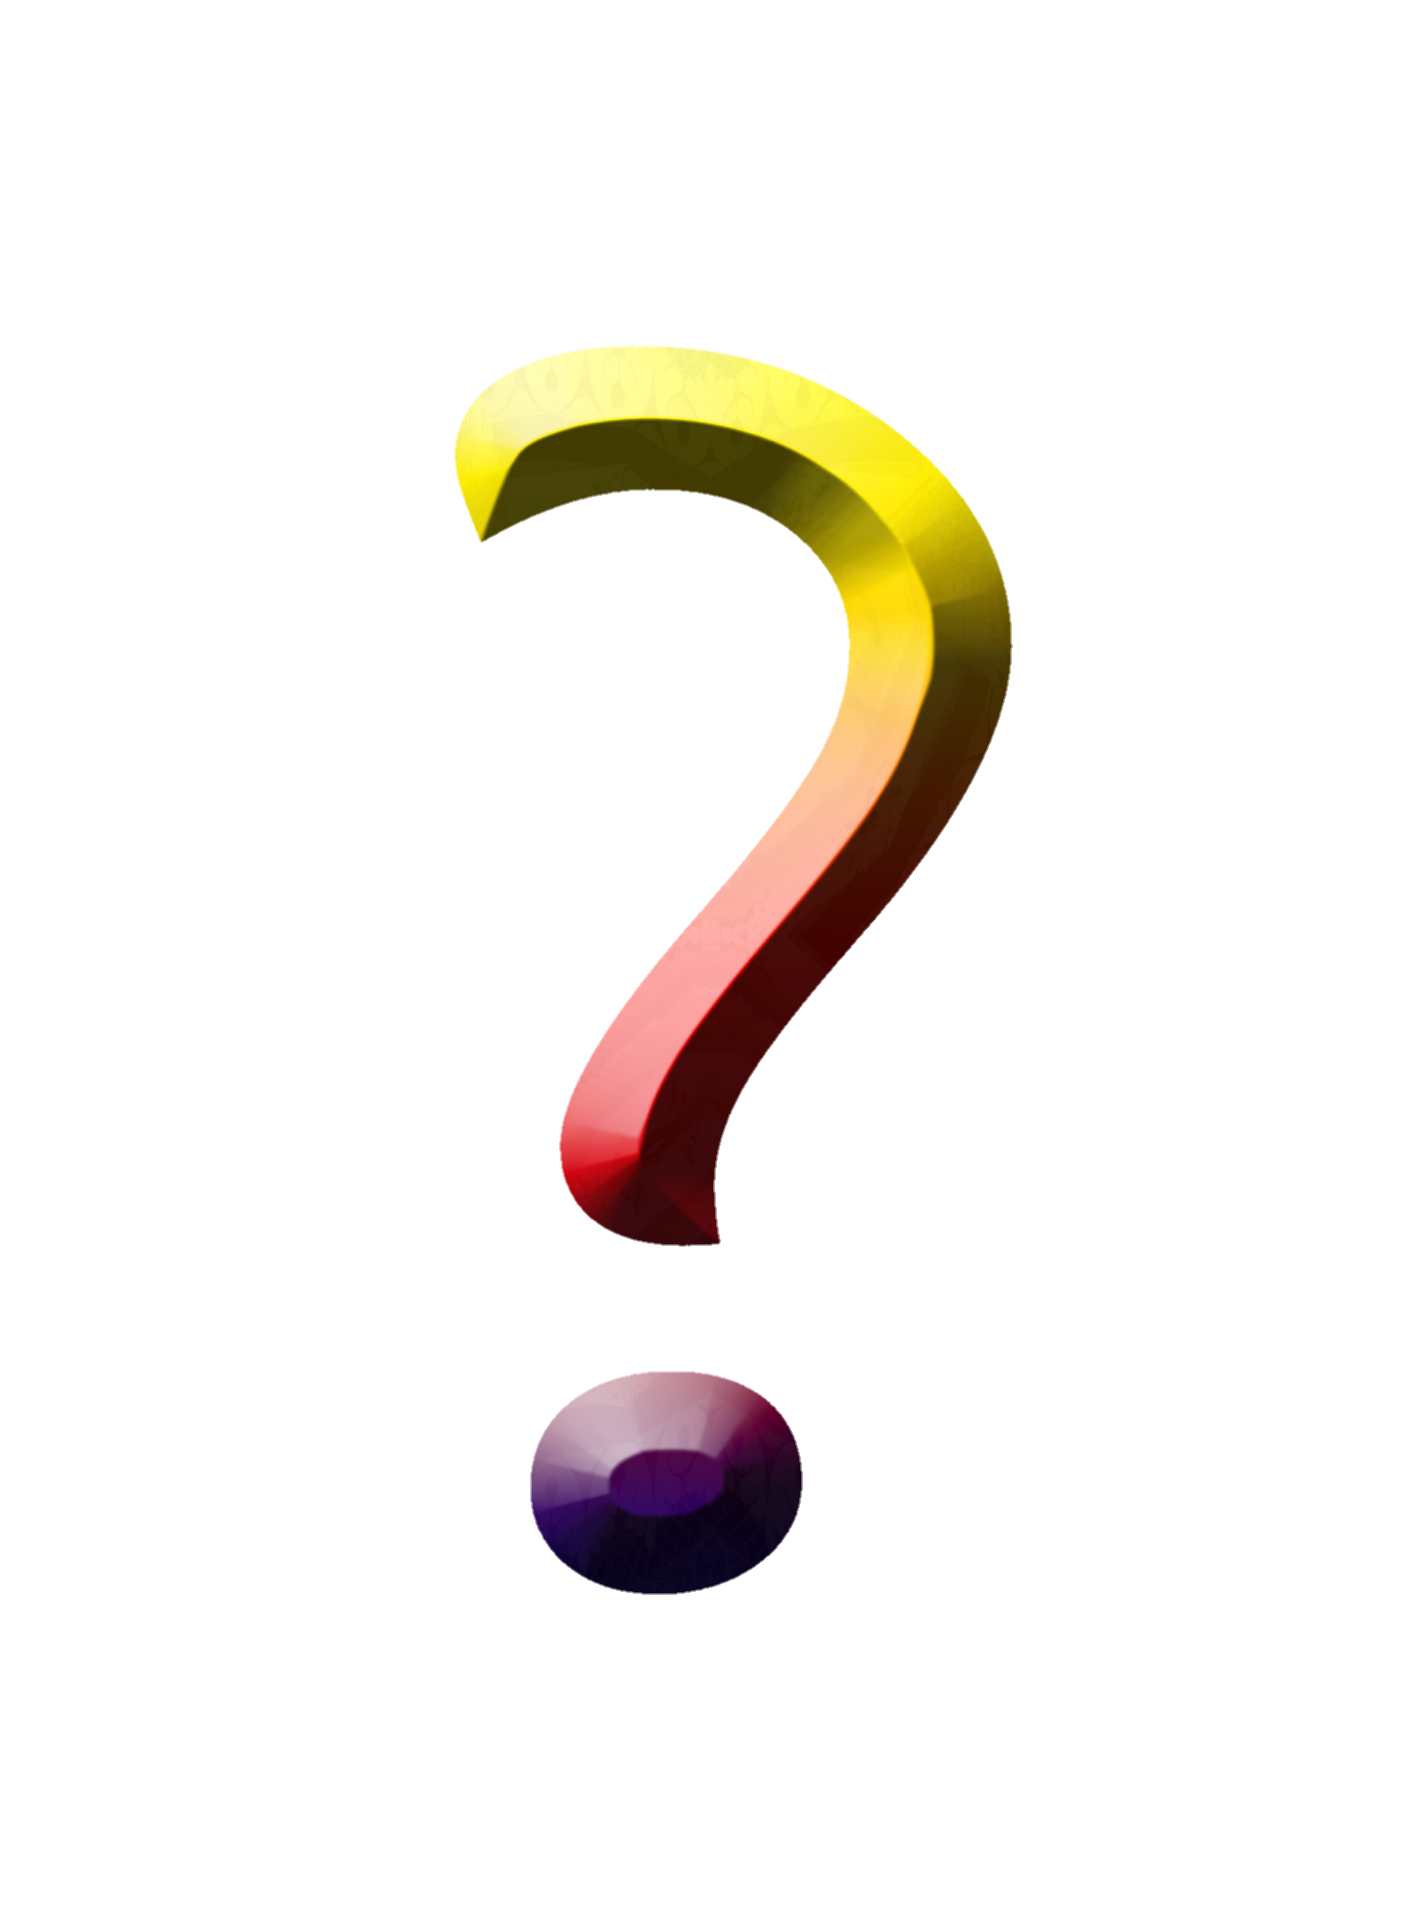 question-mark-png-from-pngfre-4